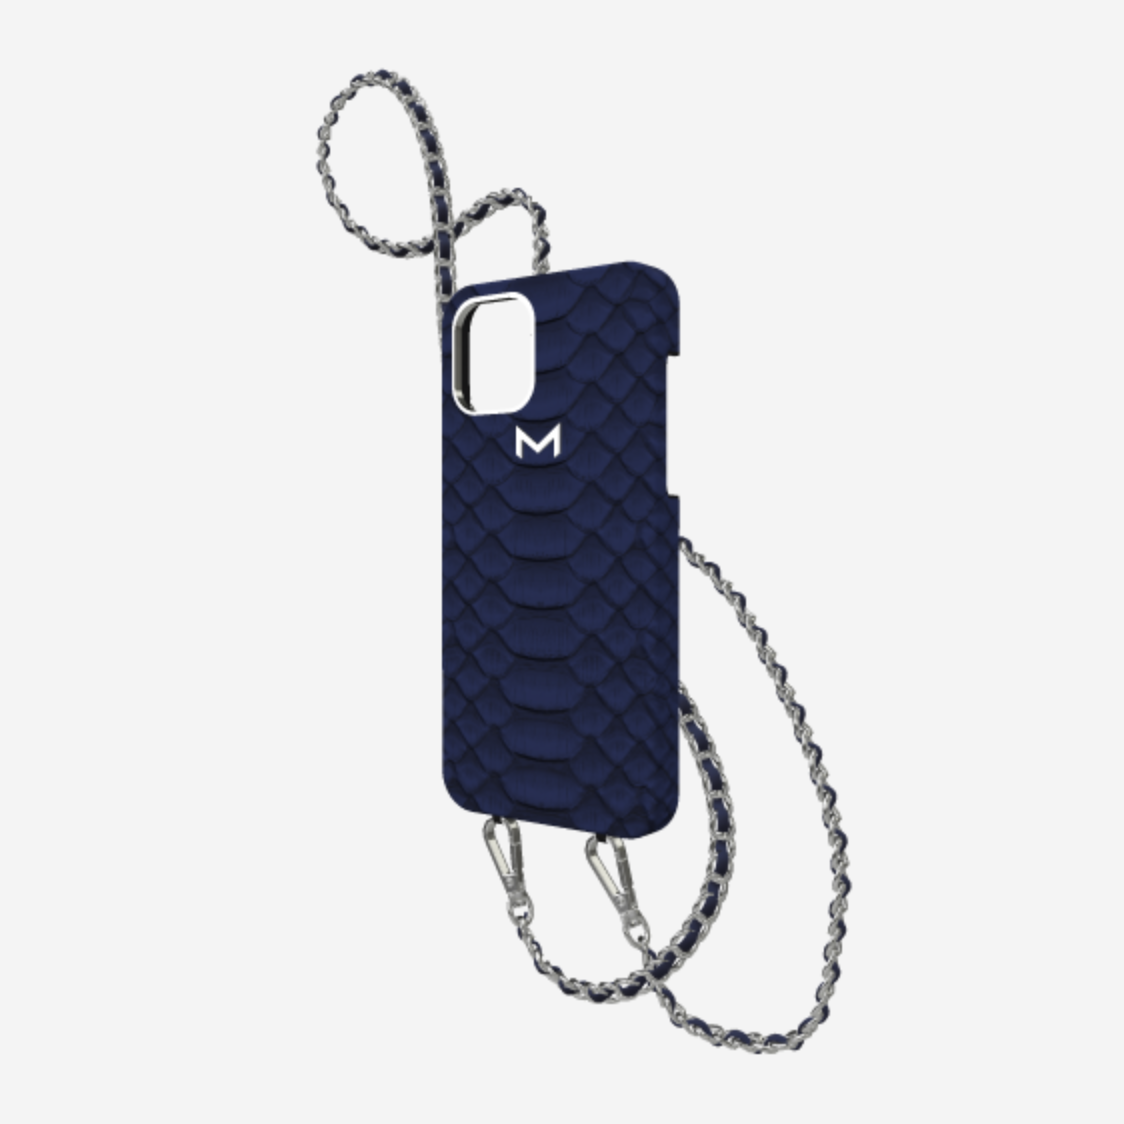 Classic Necklace Case for iPhone 12 Pro in Genuine Python Navy Blue Steel 316 